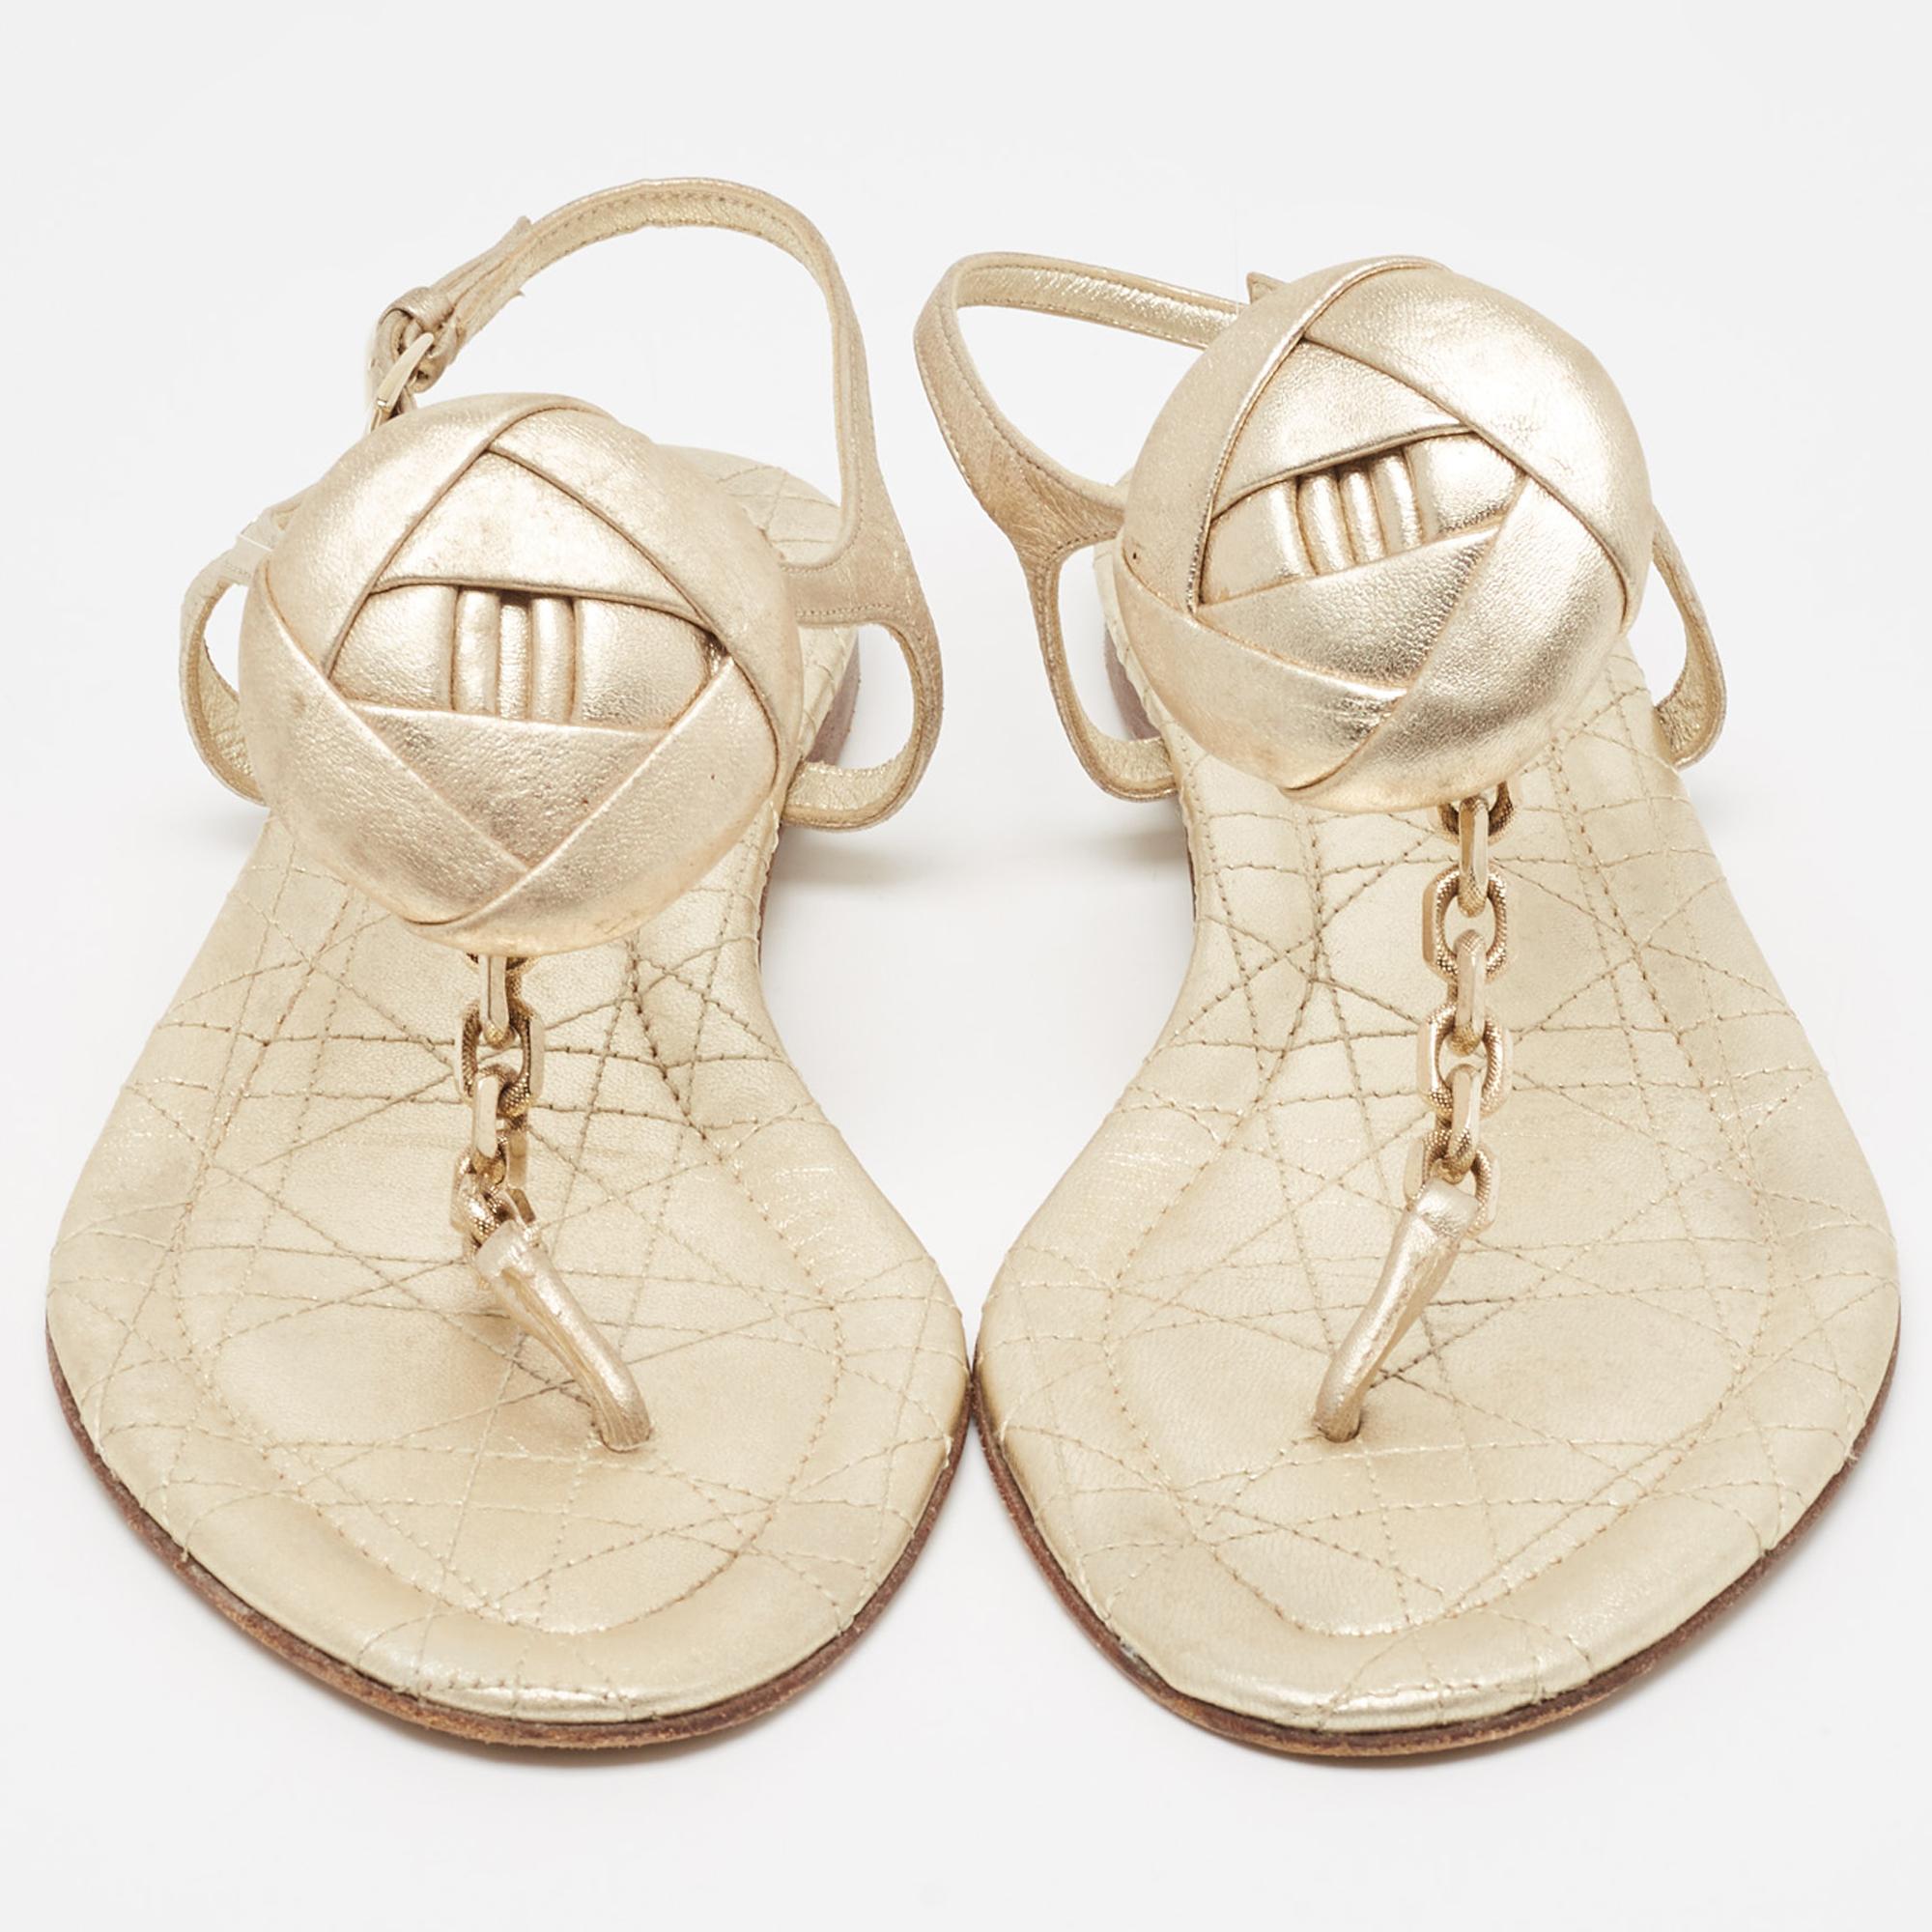 No wardrobe is complete without a gorgeous pair of flats to complete your casual looks. This pair from the house of Dior makes for a very chic addition. Crafted from gold leather, the thong sandals have metal chain detailing for the most fashionable